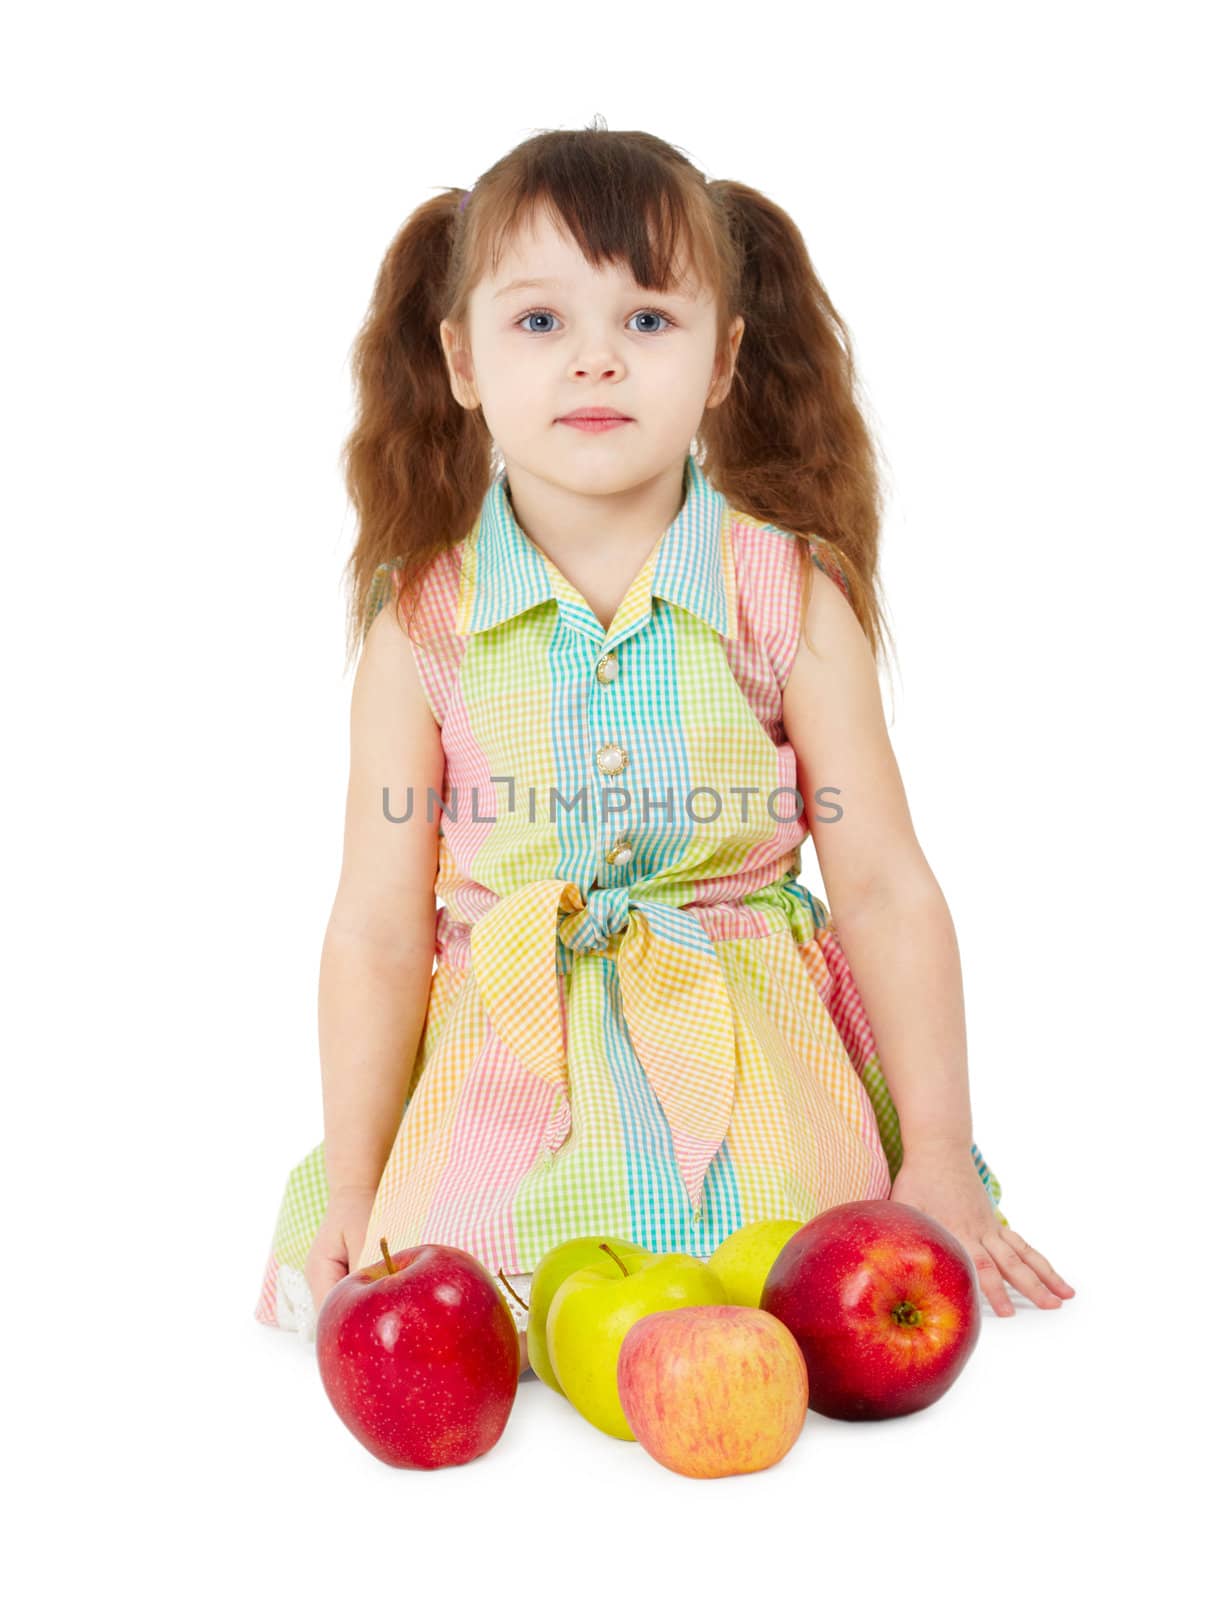 Little girl with apples sits isolated on white background by pzaxe